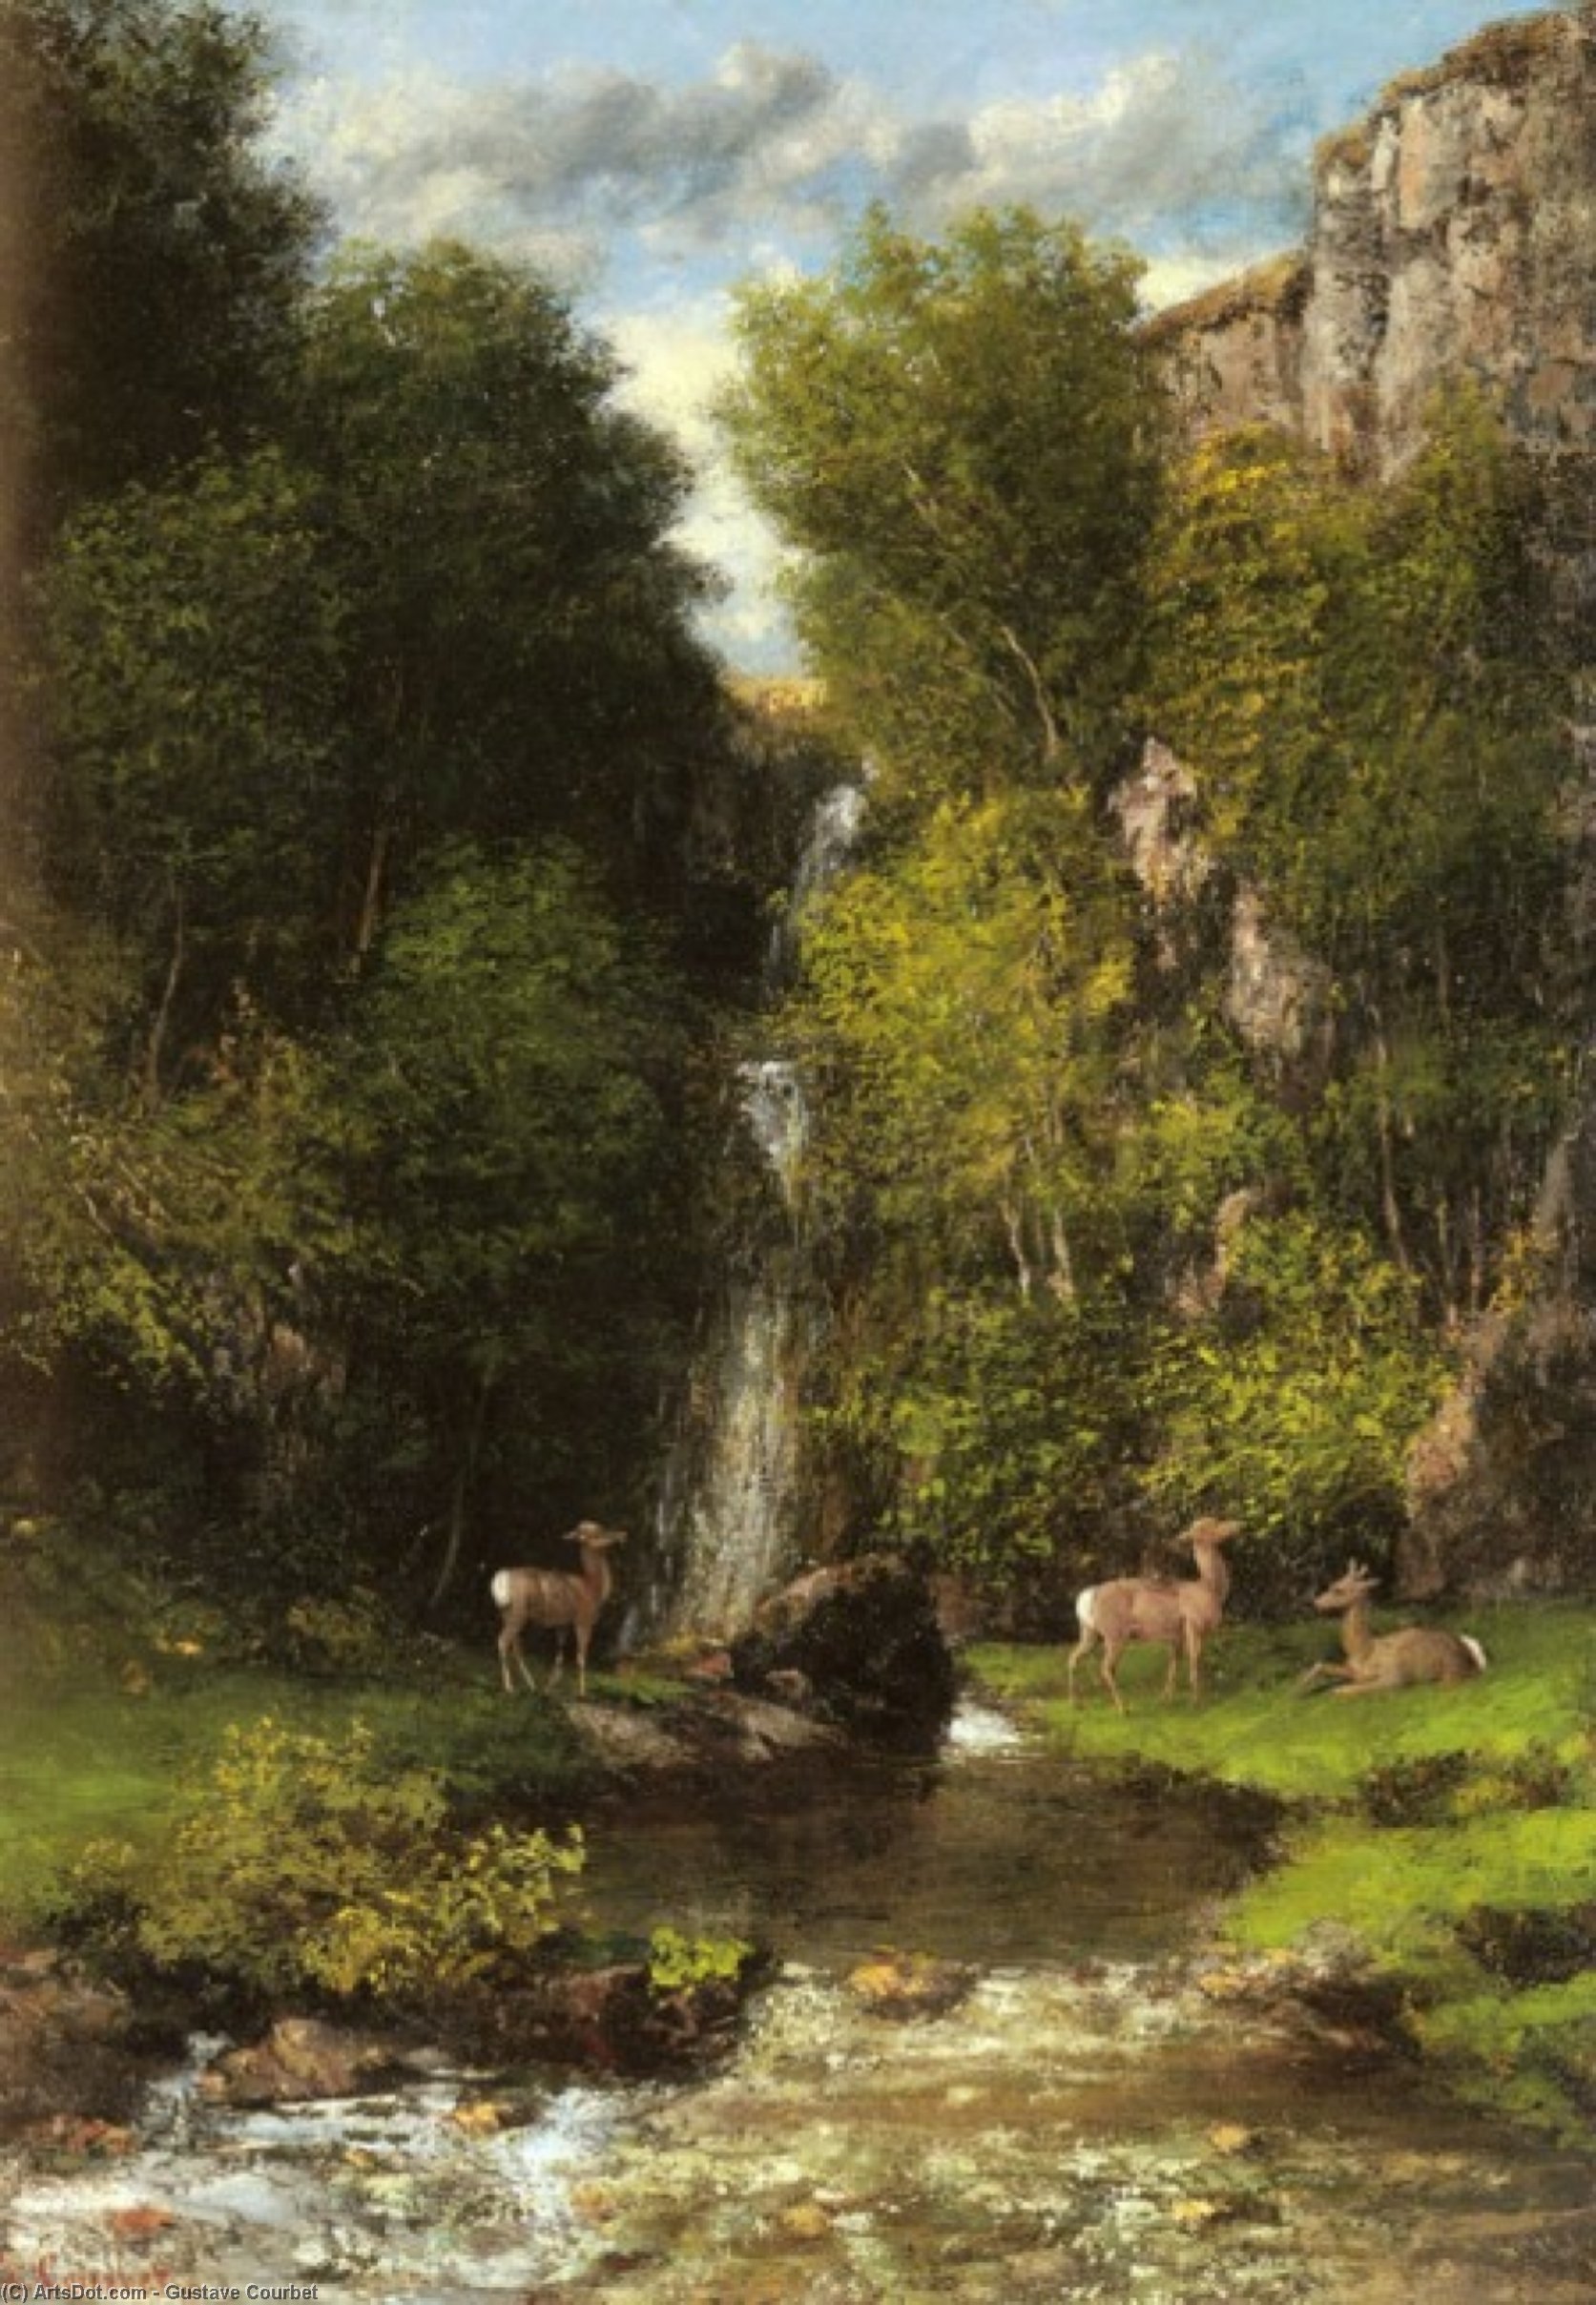 WikiOO.org - Güzel Sanatlar Ansiklopedisi - Resim, Resimler Gustave Courbet - A Family of Deer in a Landscape with a Waterfall